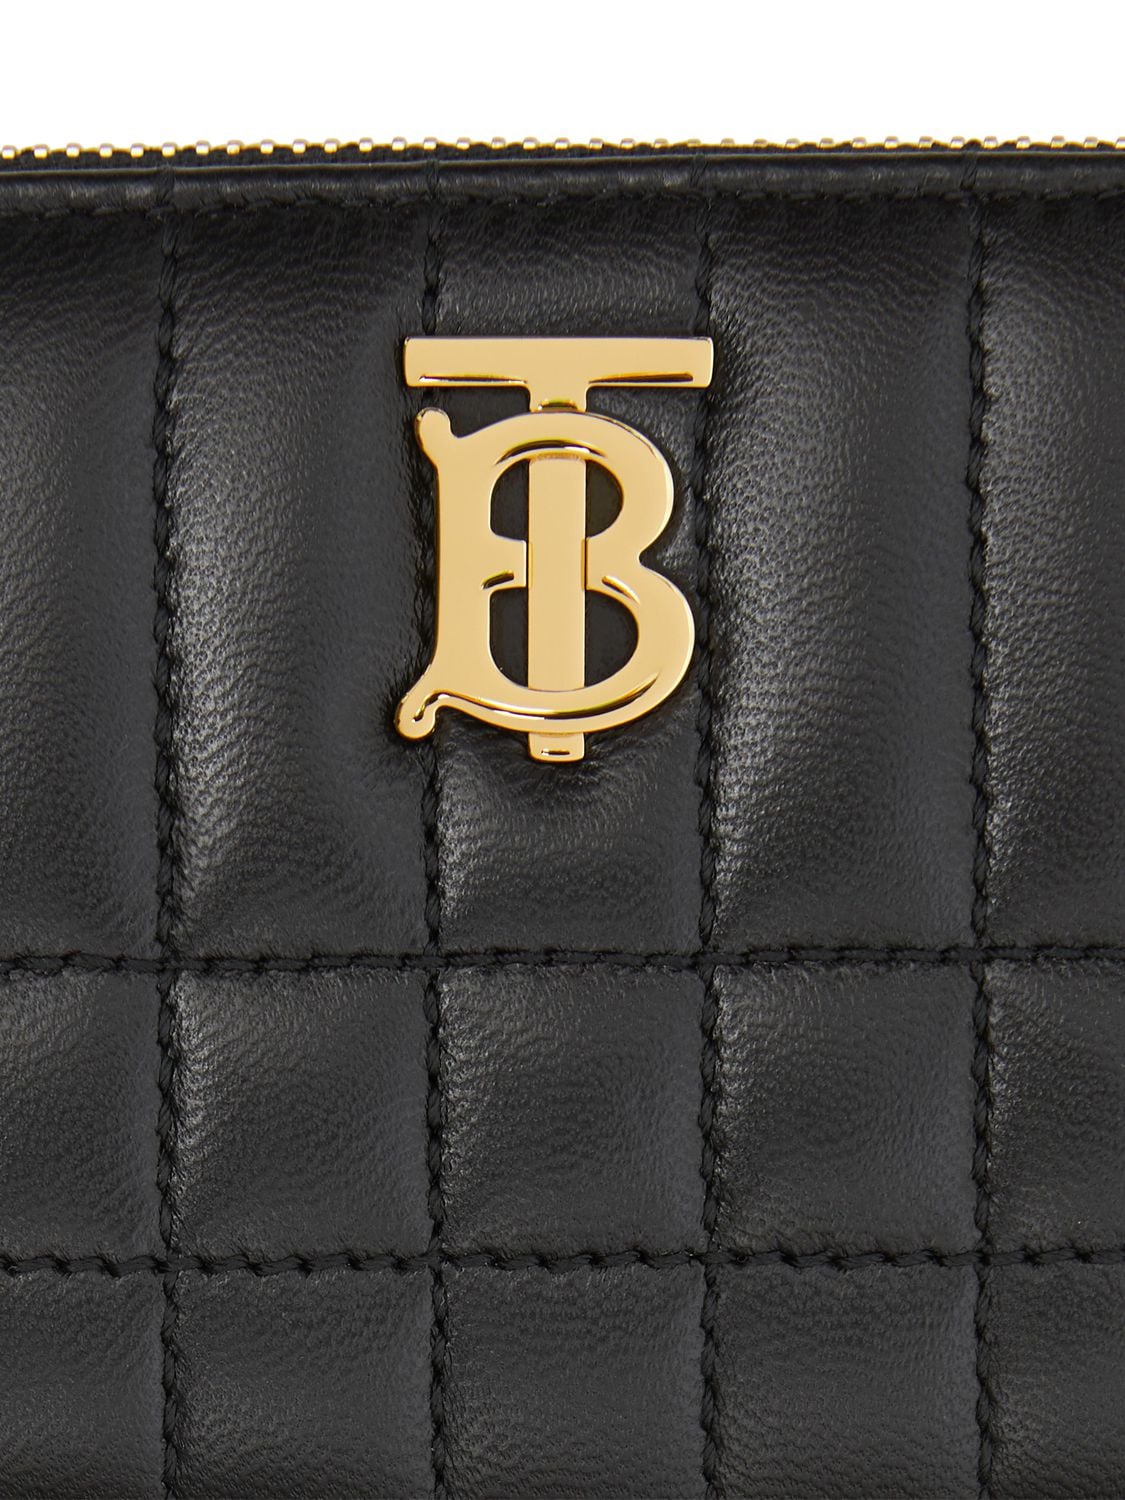 Shop Burberry Lola Quilted Leather Wallet In Black,light G